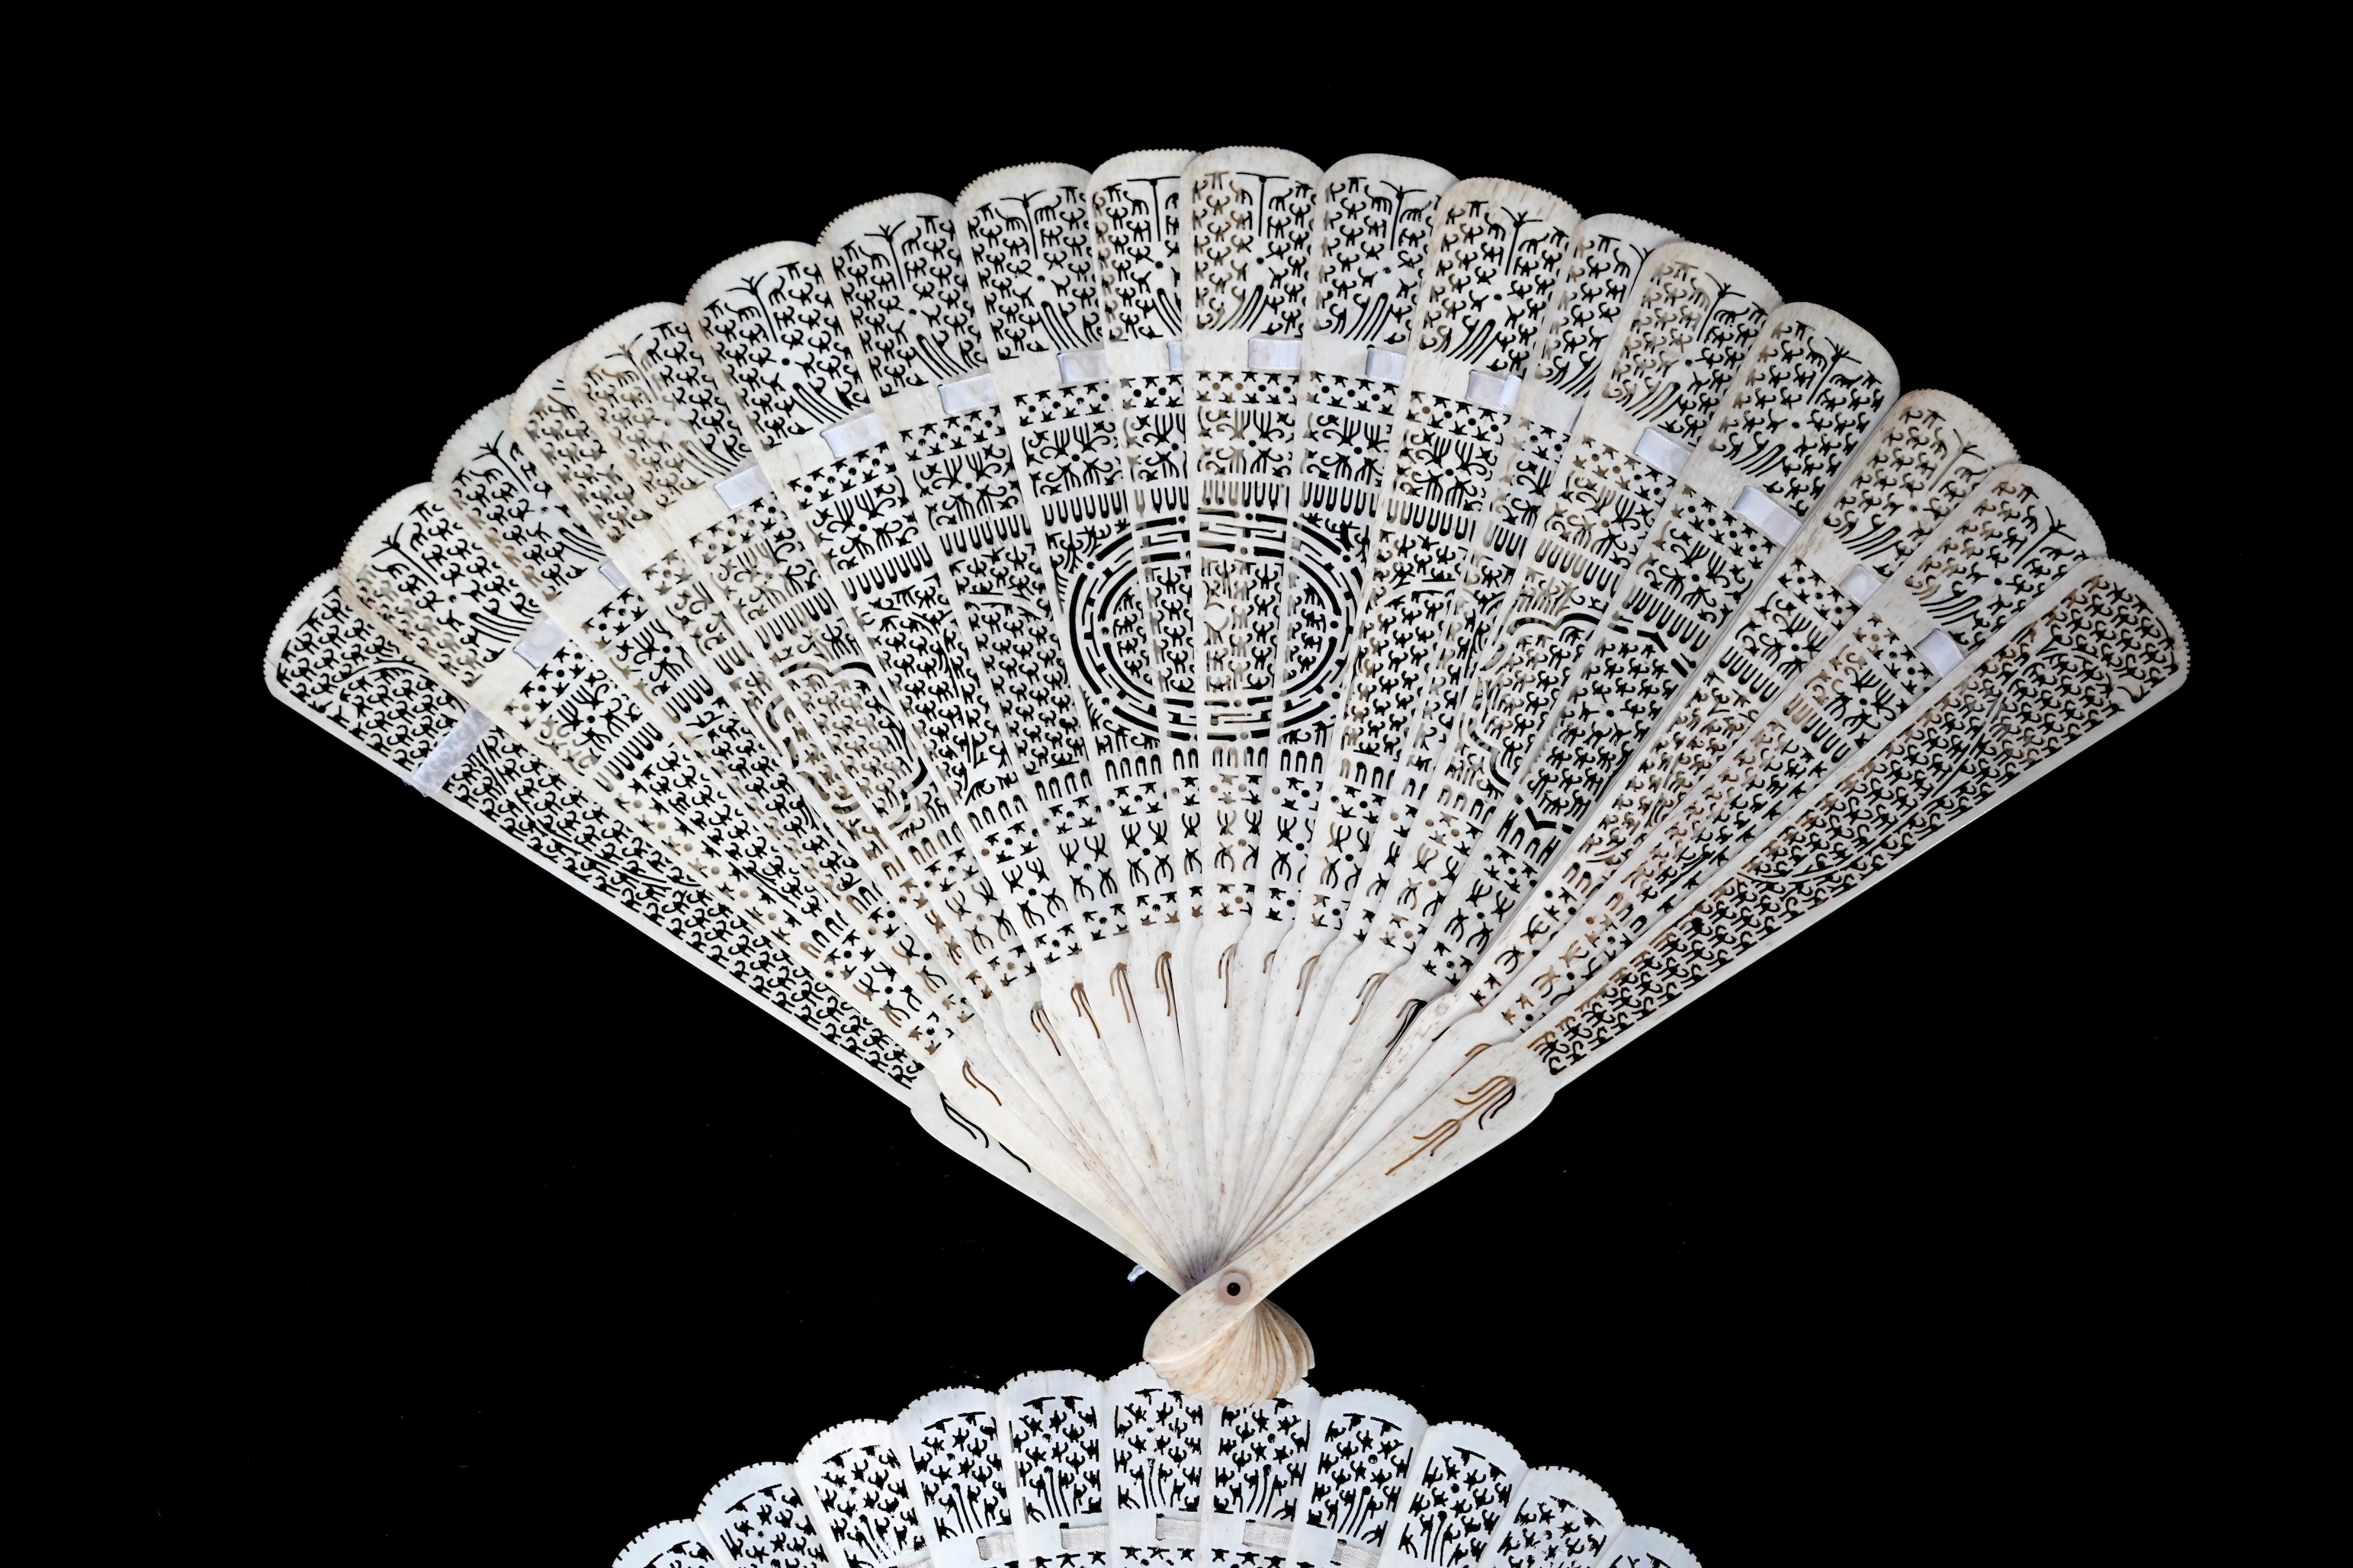 A mid 19th century Chinese brisé bone fan with intricate carving and a later smaller similar fan